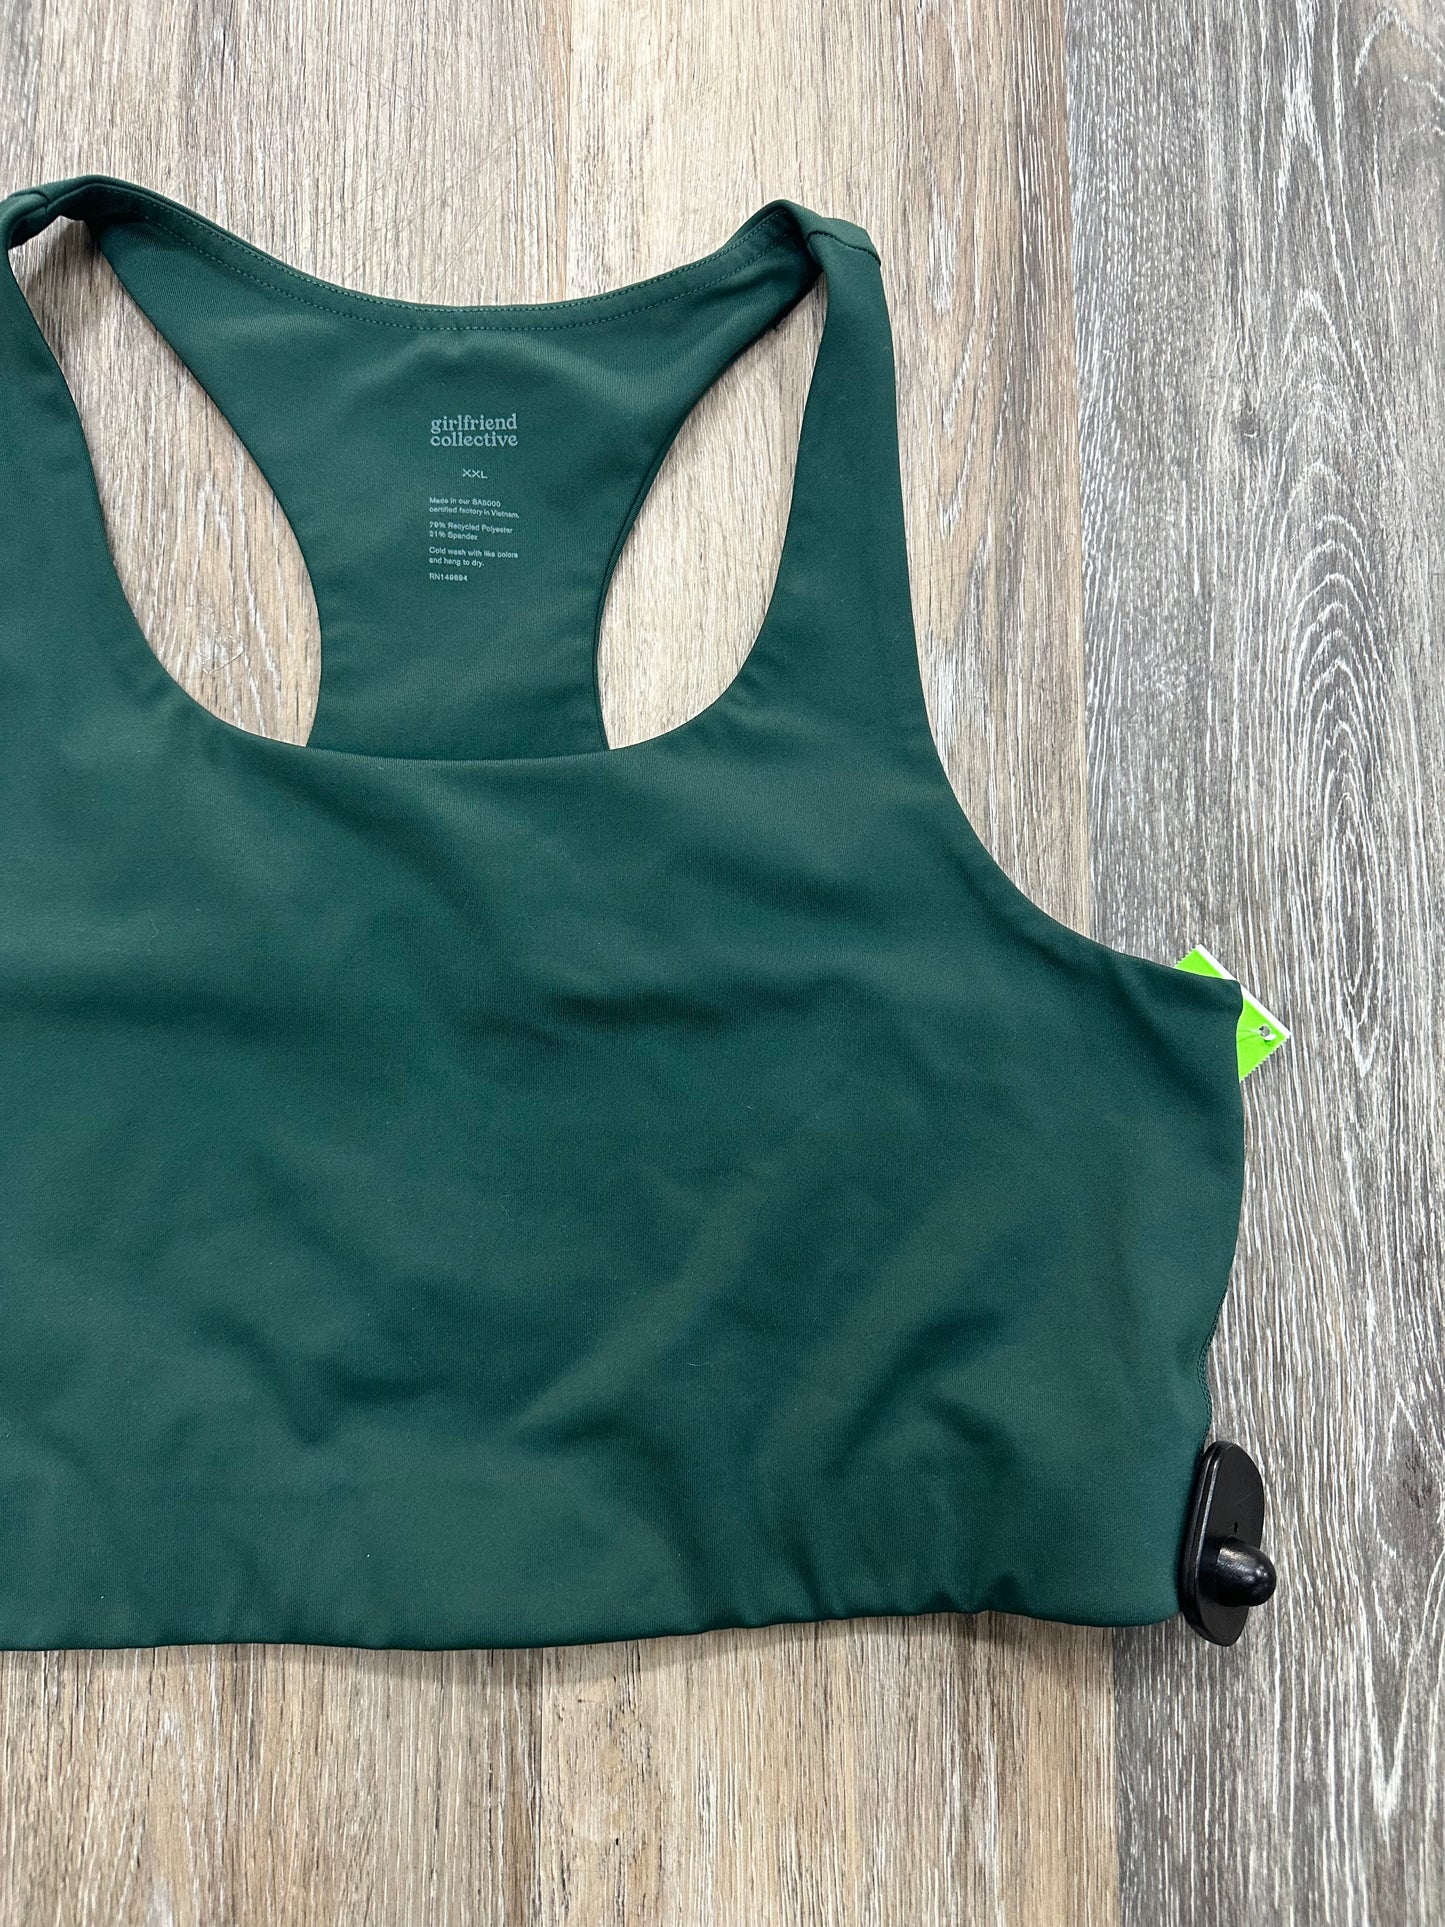 Athletic Bra By Girlfriend Collective  Size: Xxl